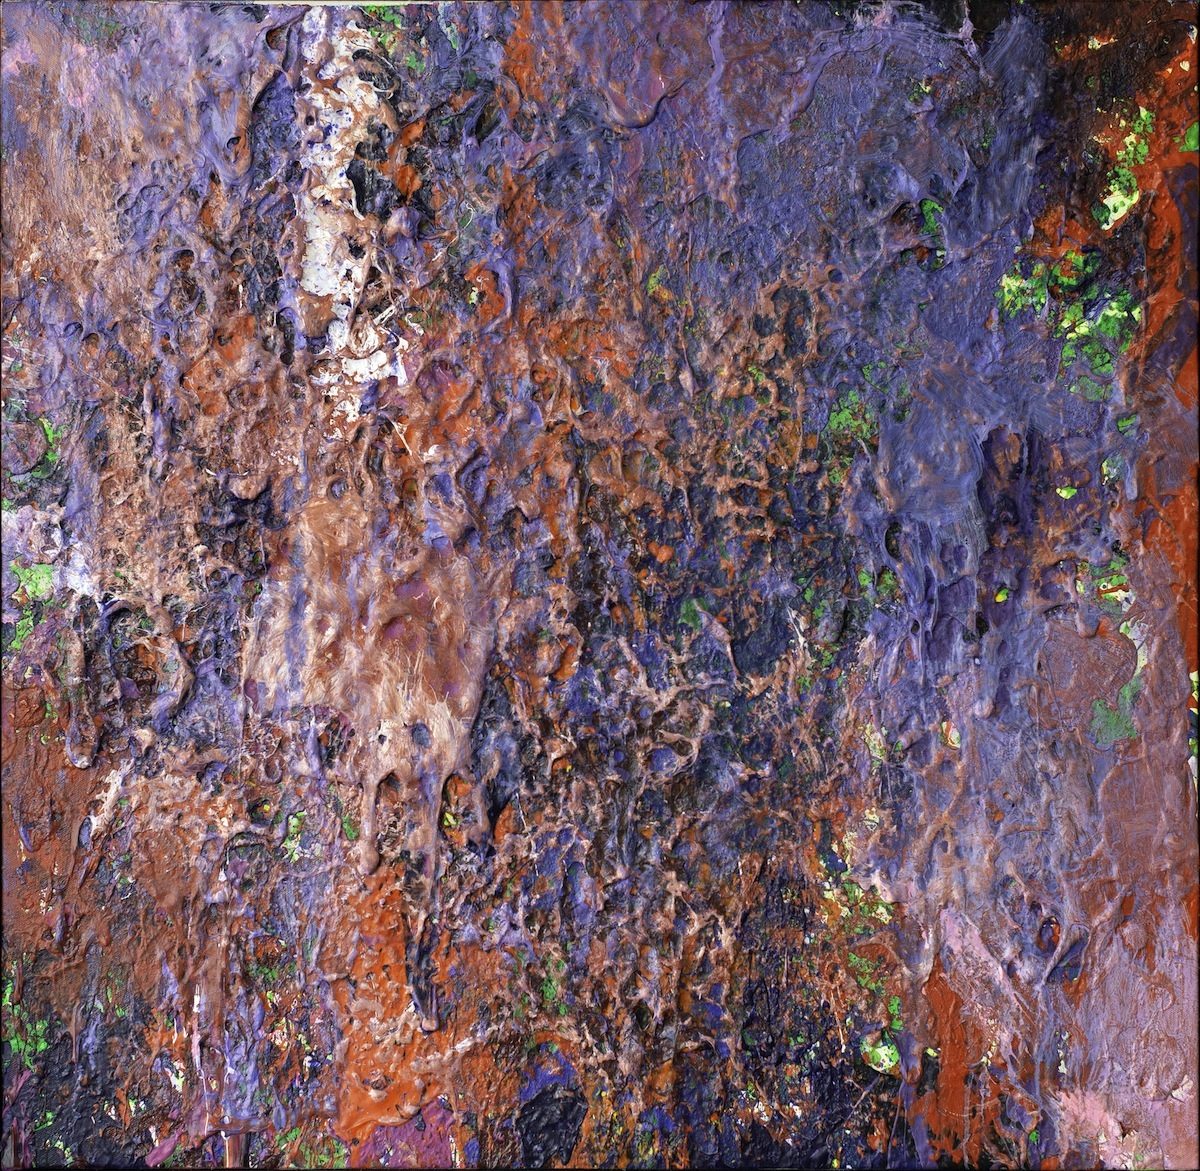 Abstract painting by artist Lee Papierowicz in shades of purple, red, white, and green with texture.